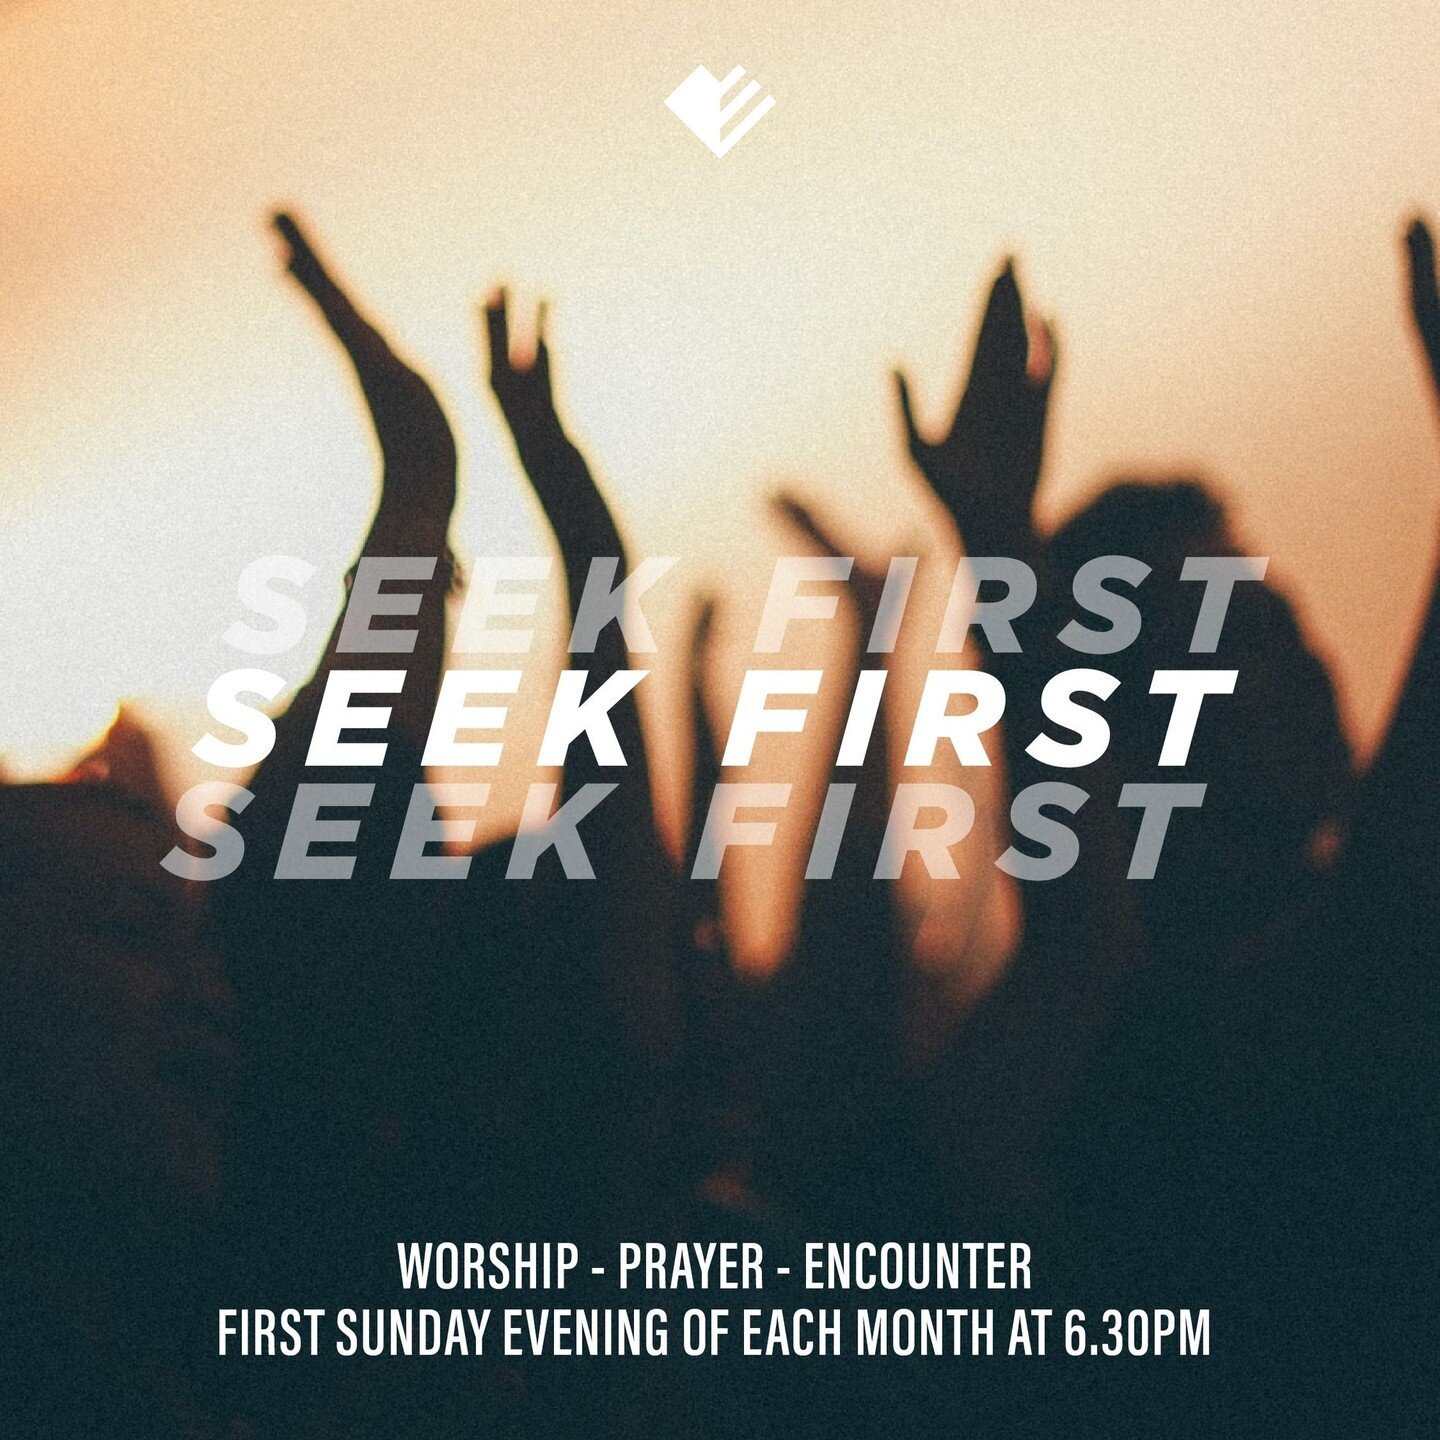 ⁠Gather with us in Emmanuel Lurgan this Sunday night (7th) at 6:30pm as we make space for extended worship and devotion to Jesus. ⁠
⁠
The atmosphere is open and relaxed, and you can expect more space and less structure than our regular Sunday gatheri